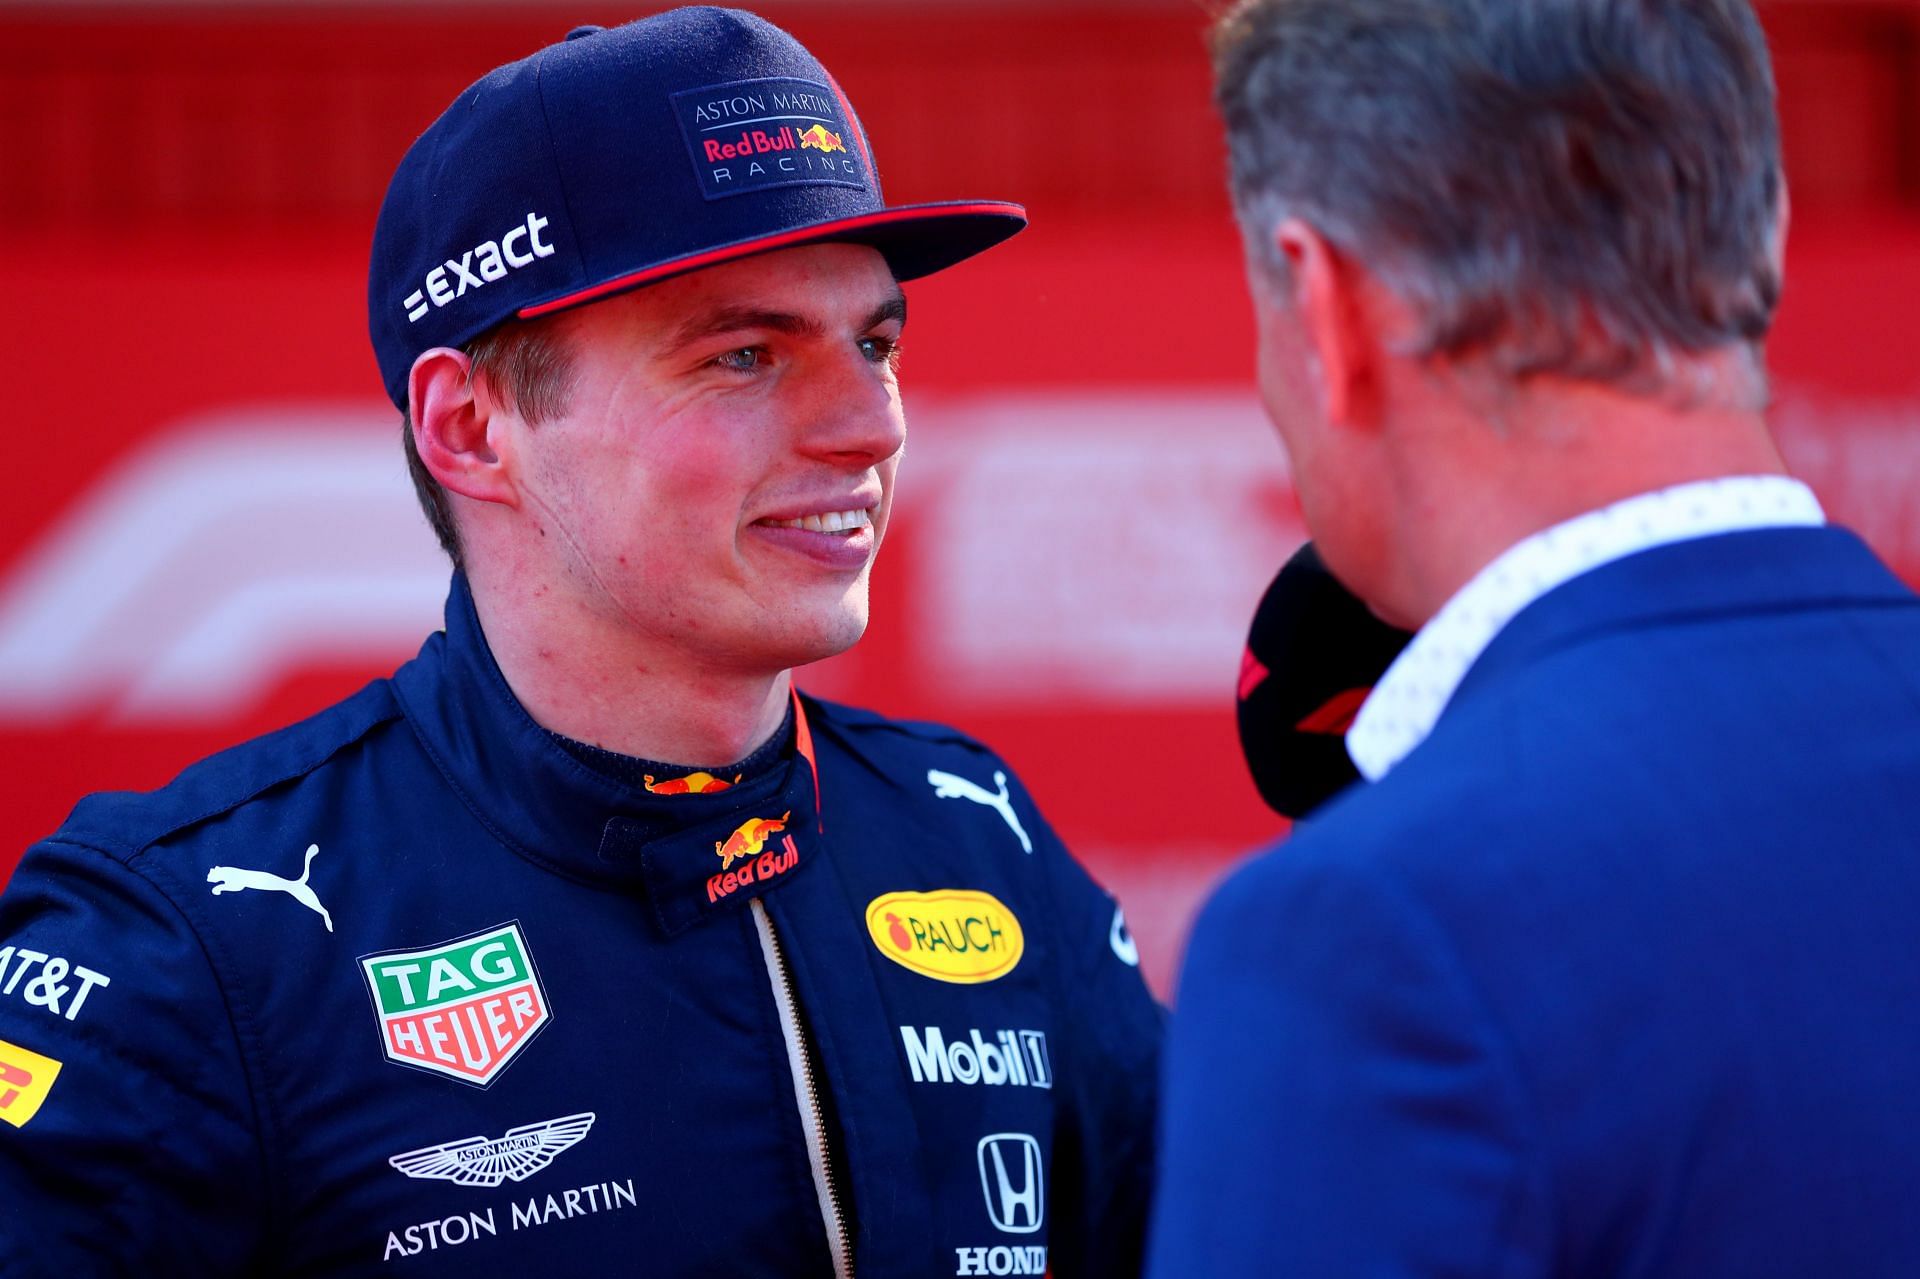 Max Verstappen (left) talks with David Coulthard (right) in parc ferm&eacute; during the Spanish Grand Prix (Photo by Dan Istitene/Getty Images)